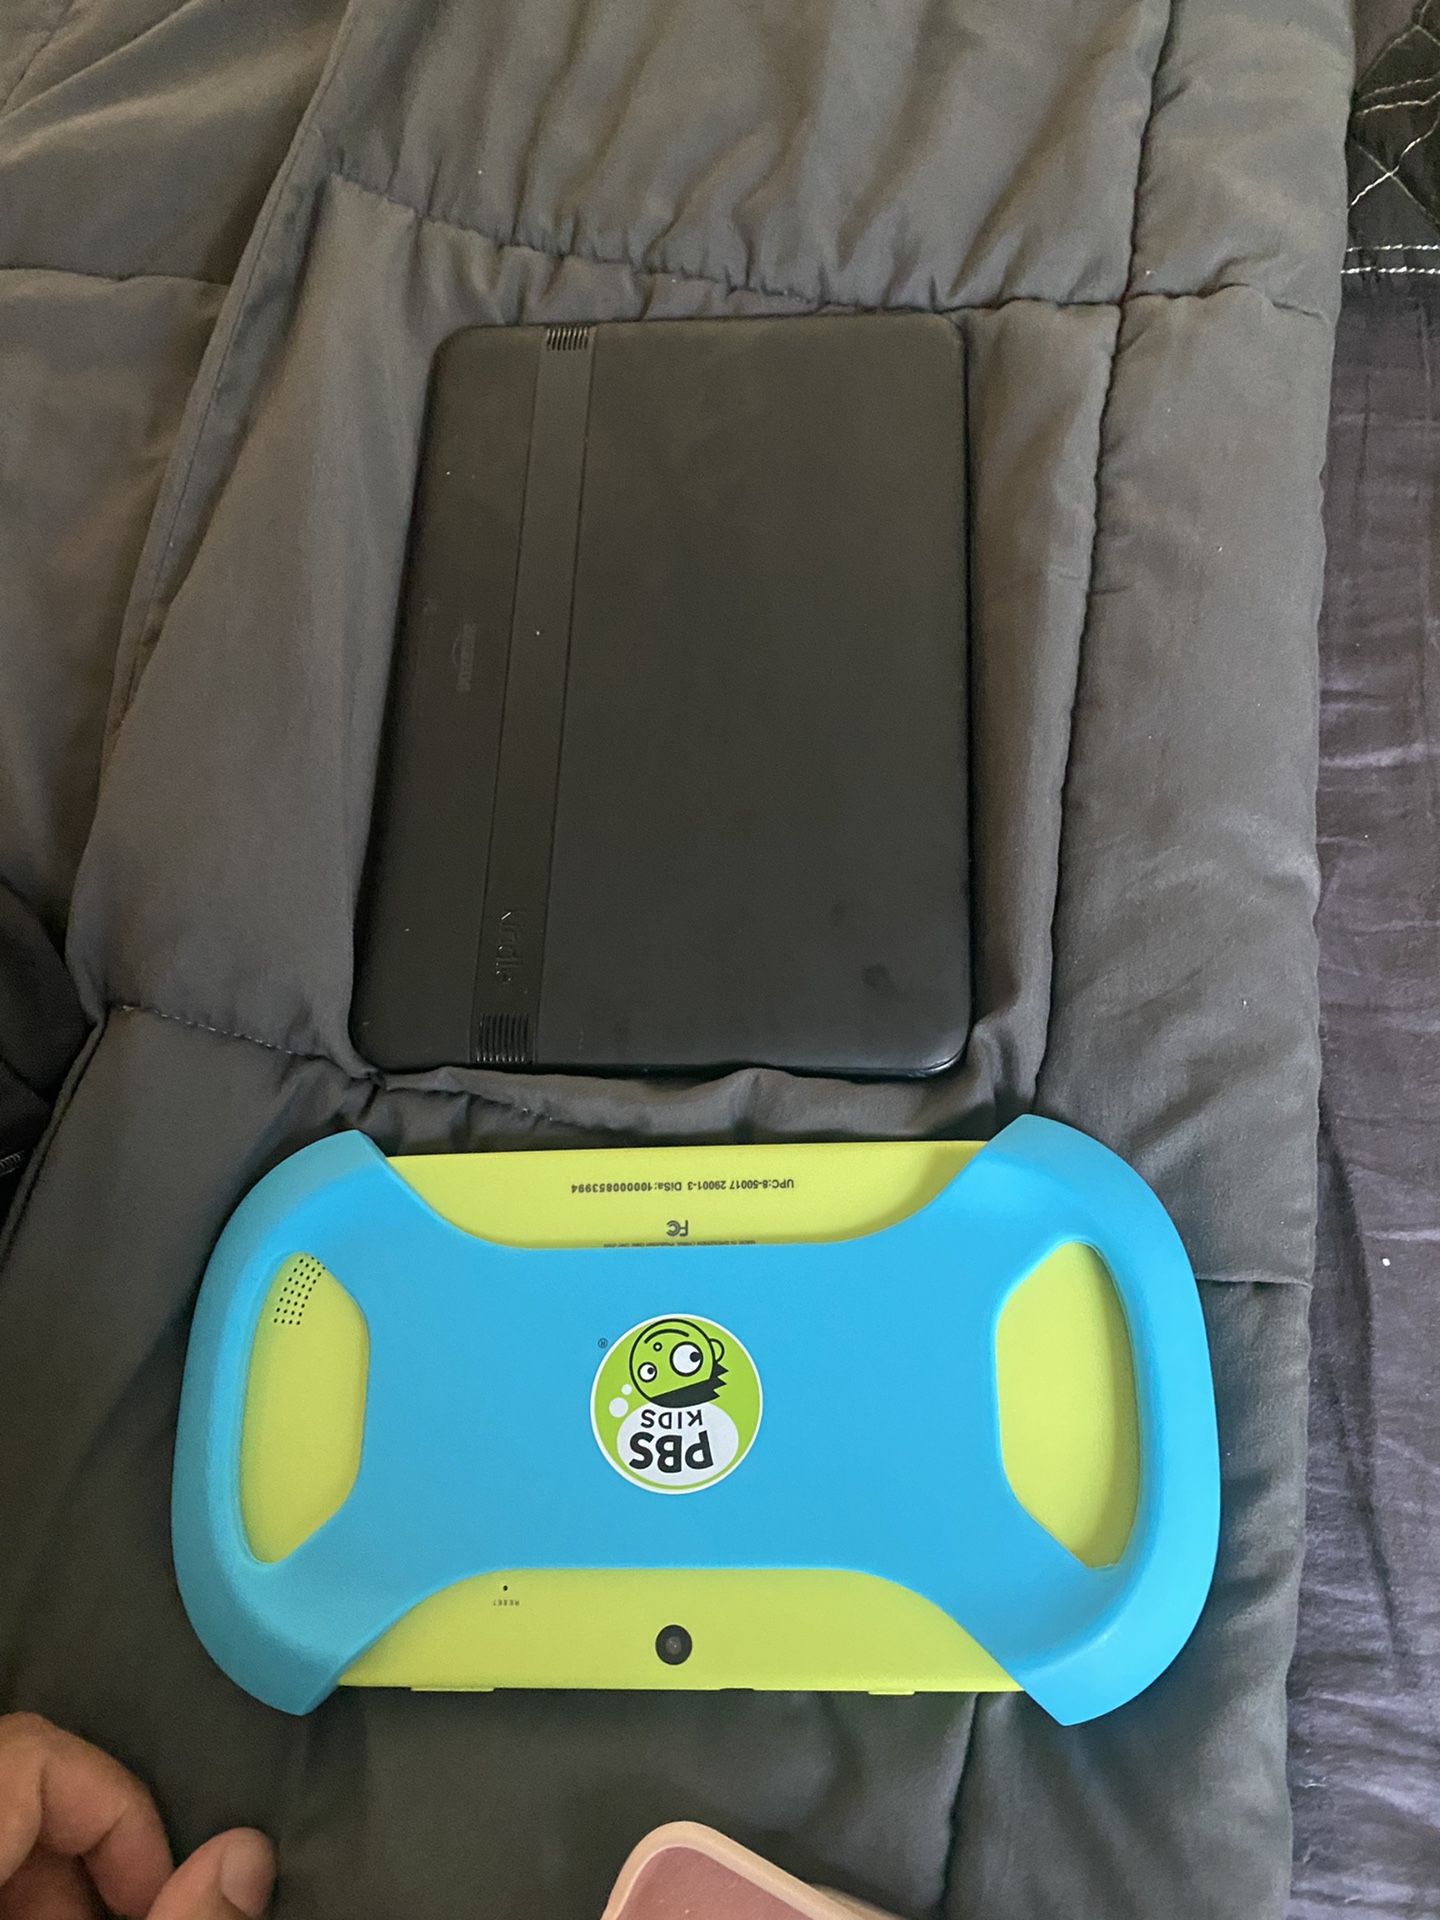 PBS Kids Tablet And Amazon Kindle Tablet